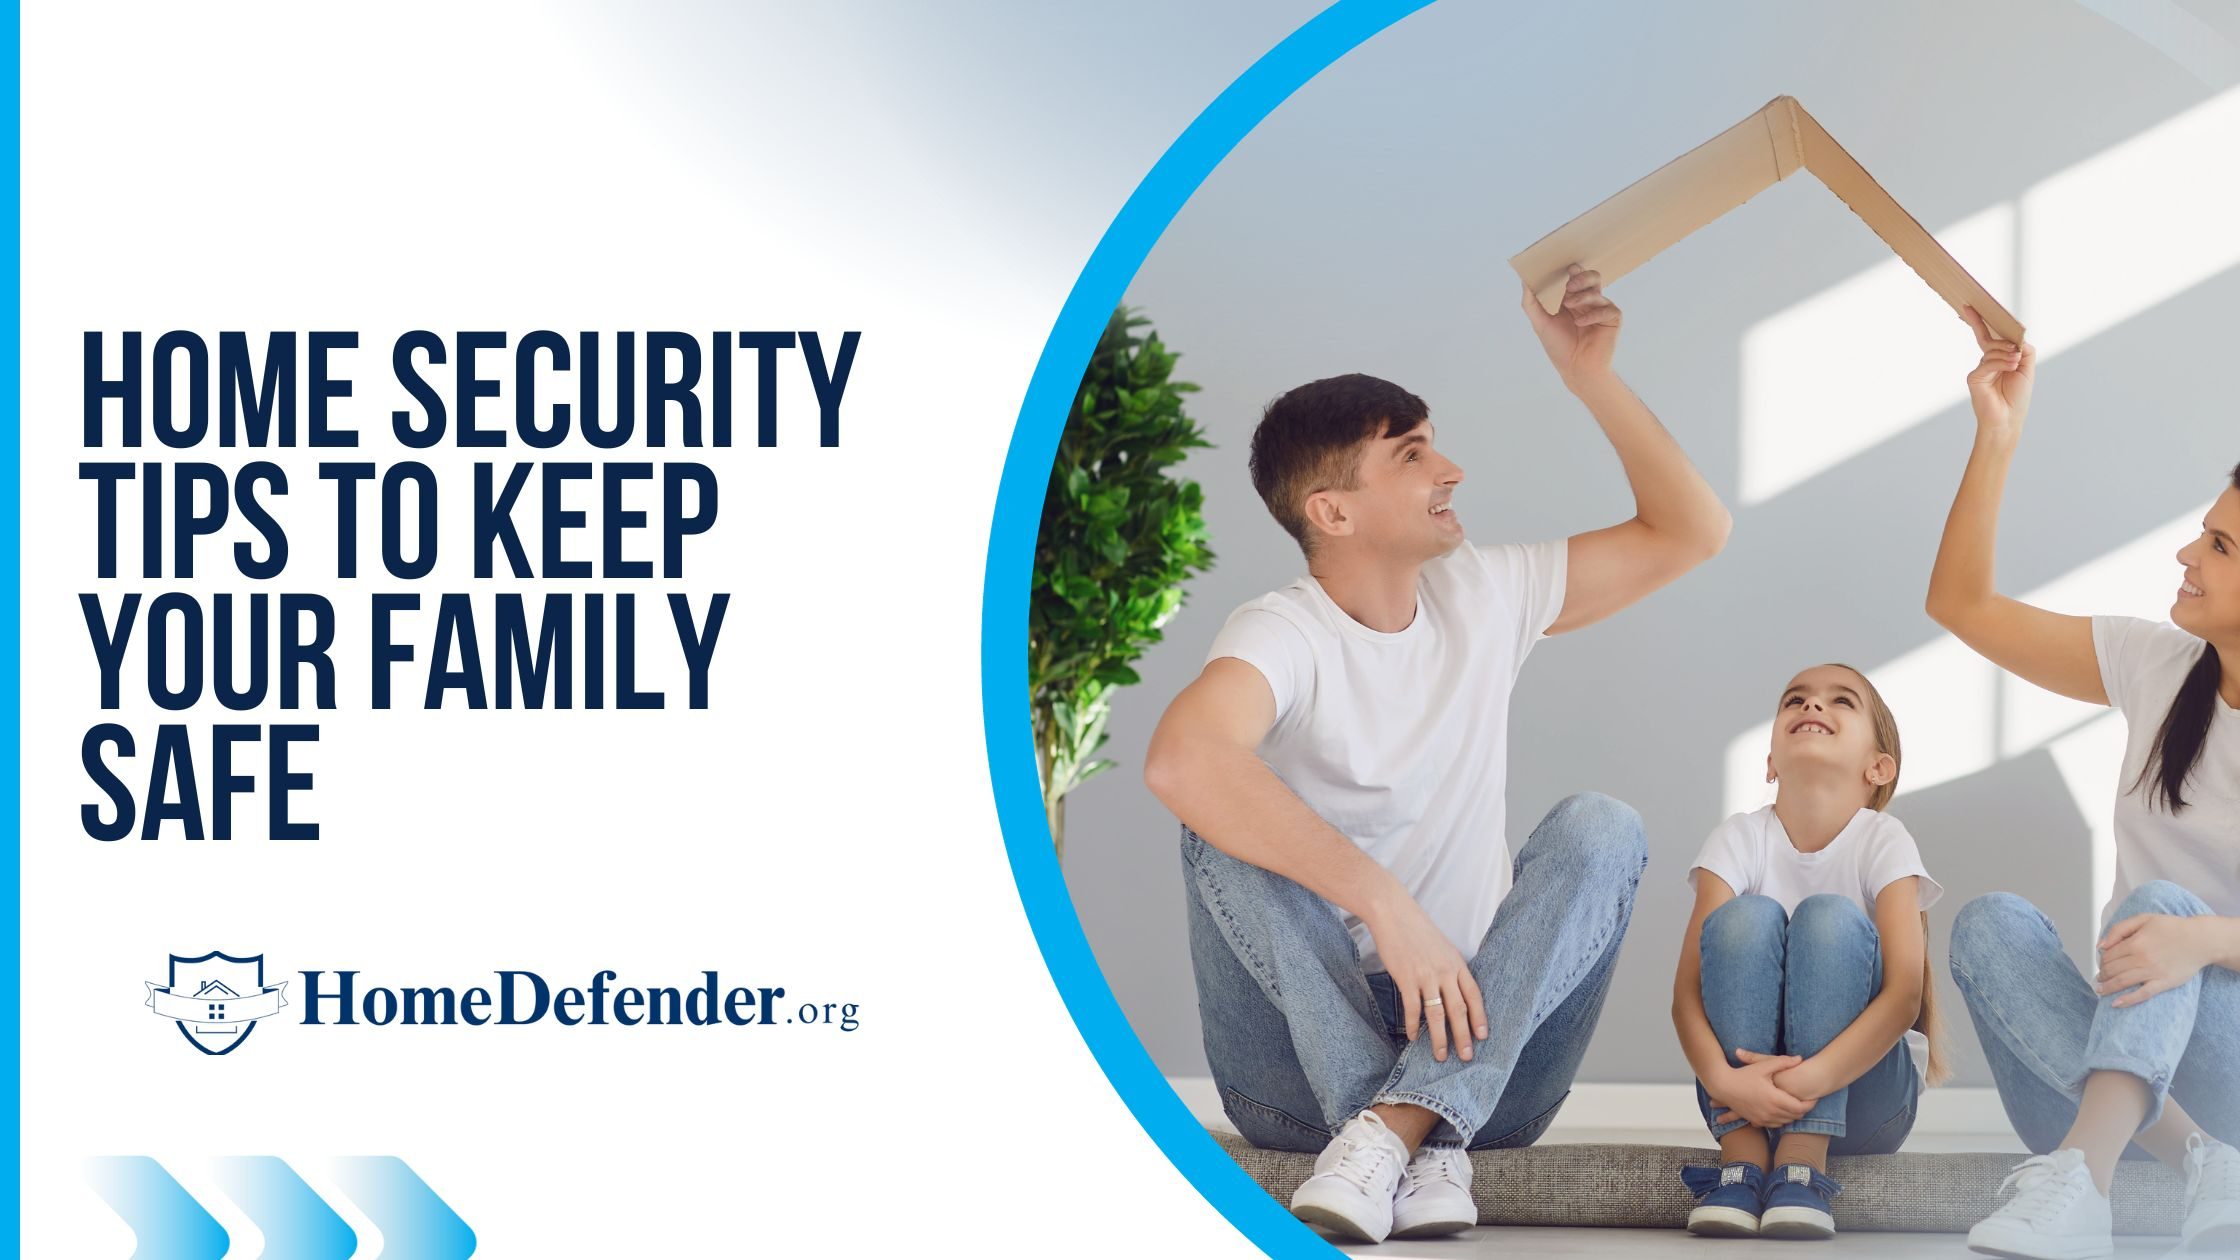 Home Security Tips to Keep Your Family Safe